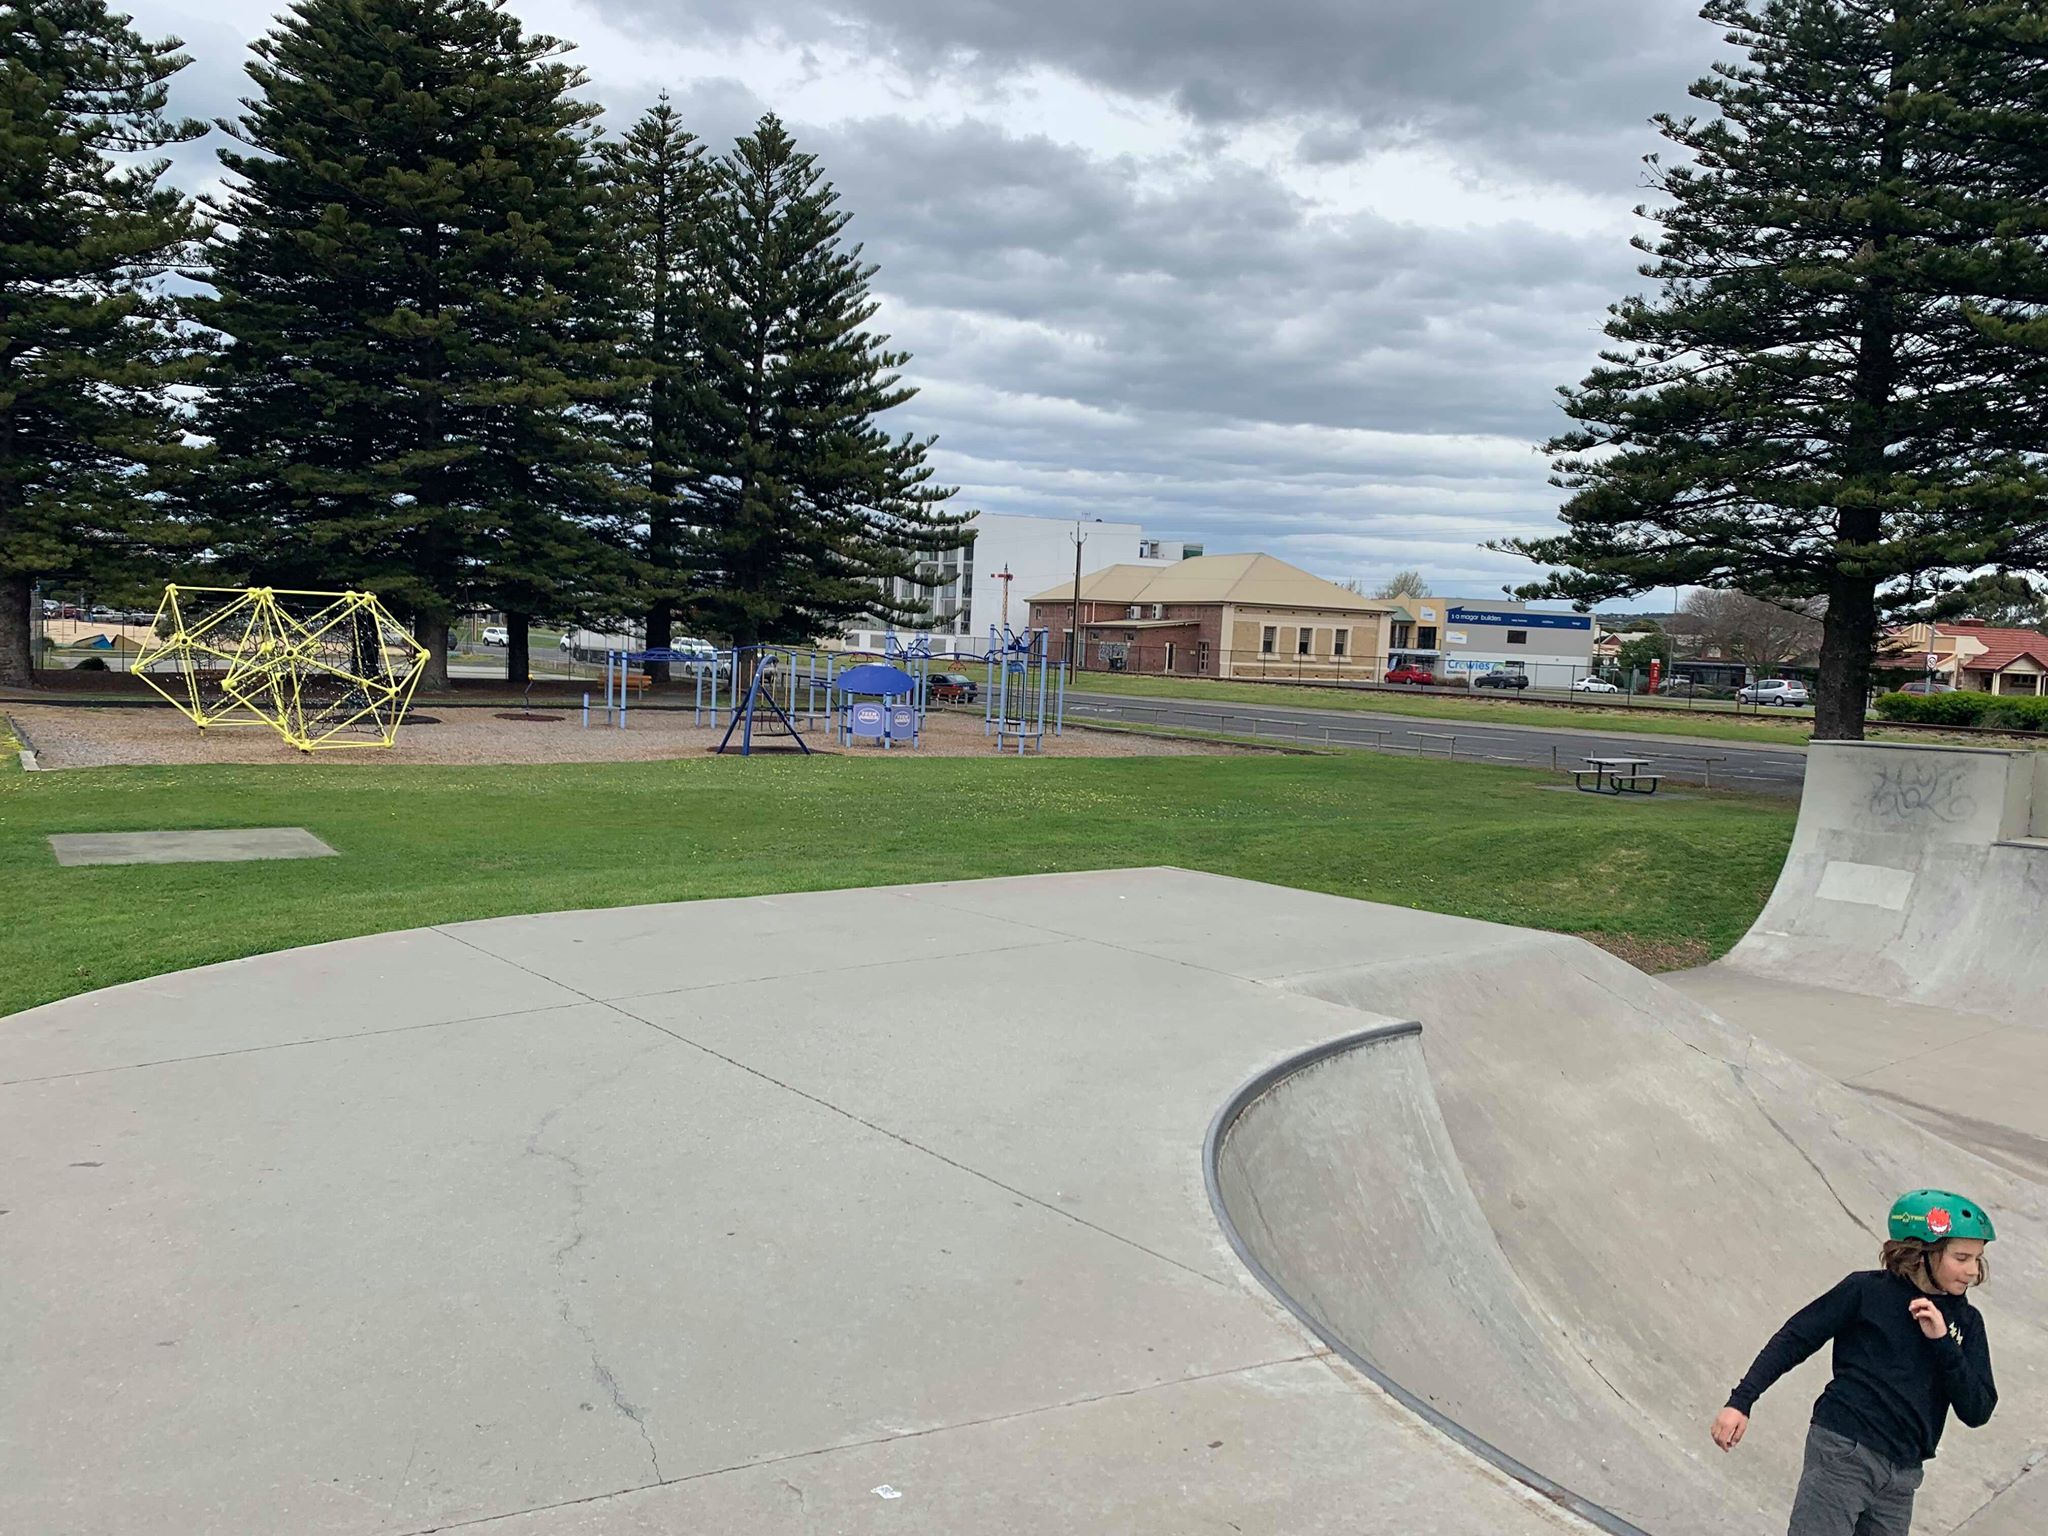 Victor Harbor Regional Youth Park and Teenranger